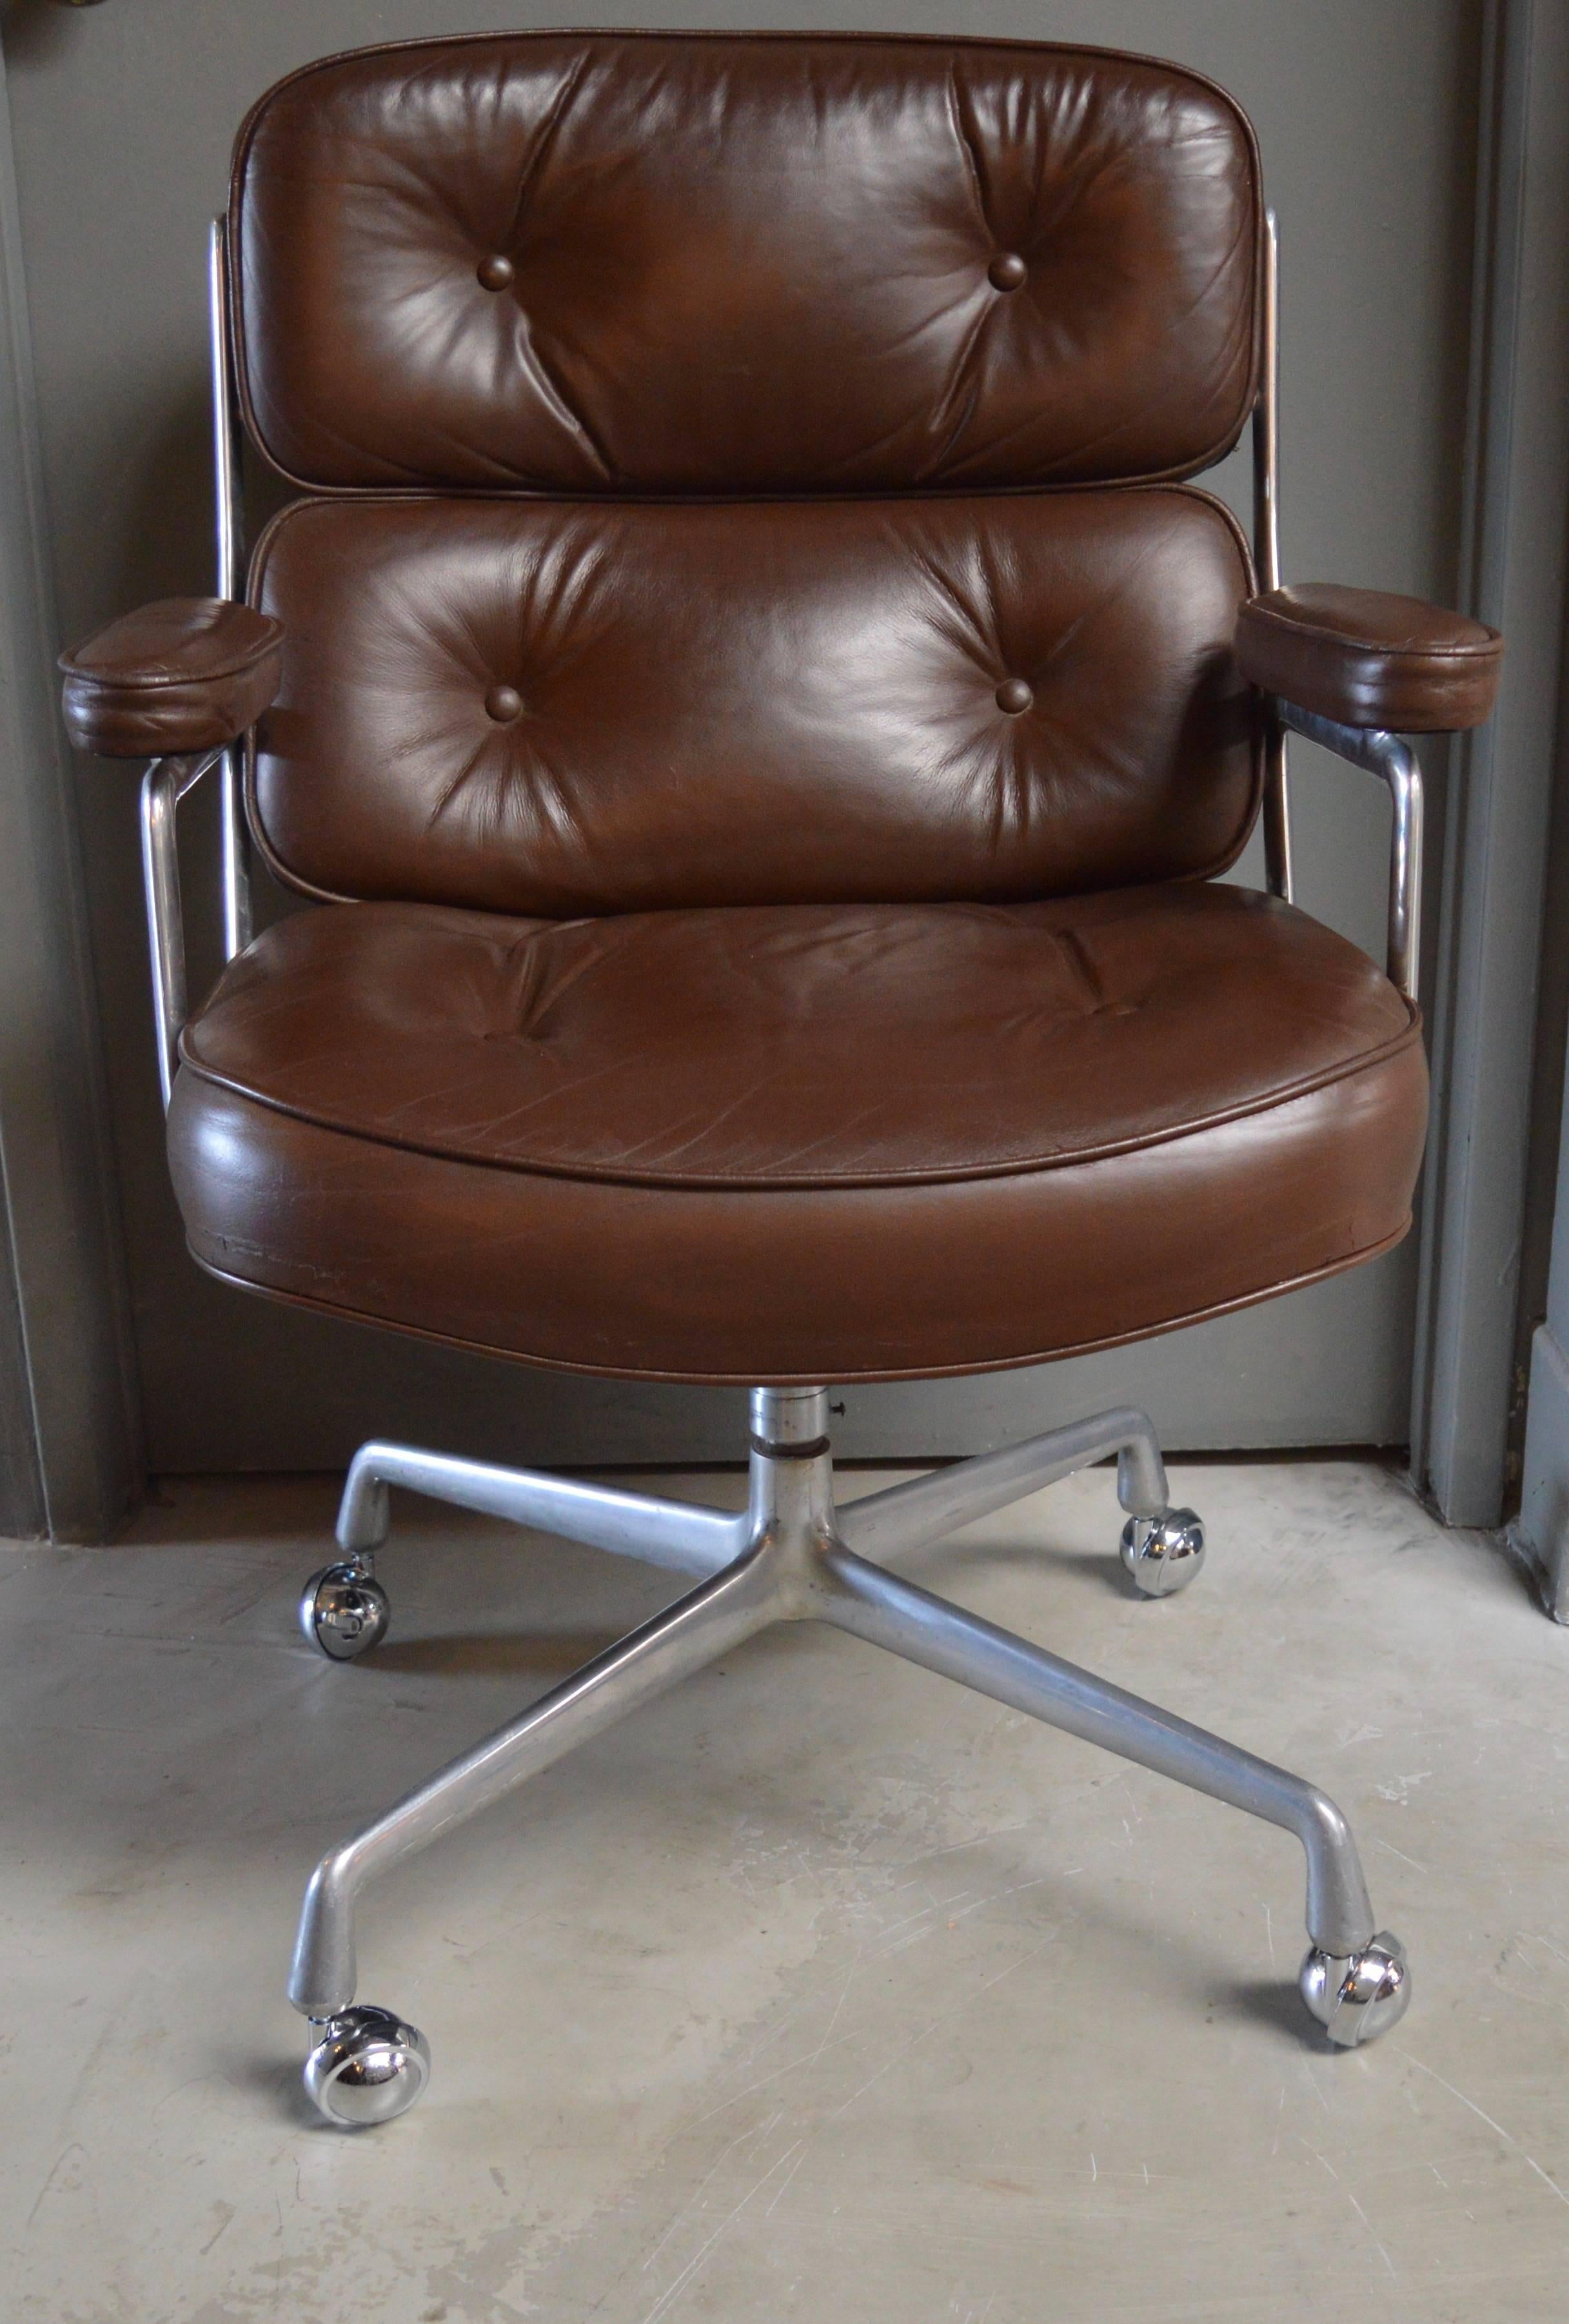 Great vintage leather office chair from the Time Life building in New York. Dated Feb' 24 1976 on underside of chair. Original brown leather in good vintage condition. Chair swivels and reclines.  New casters. Original aluminum frame also in good